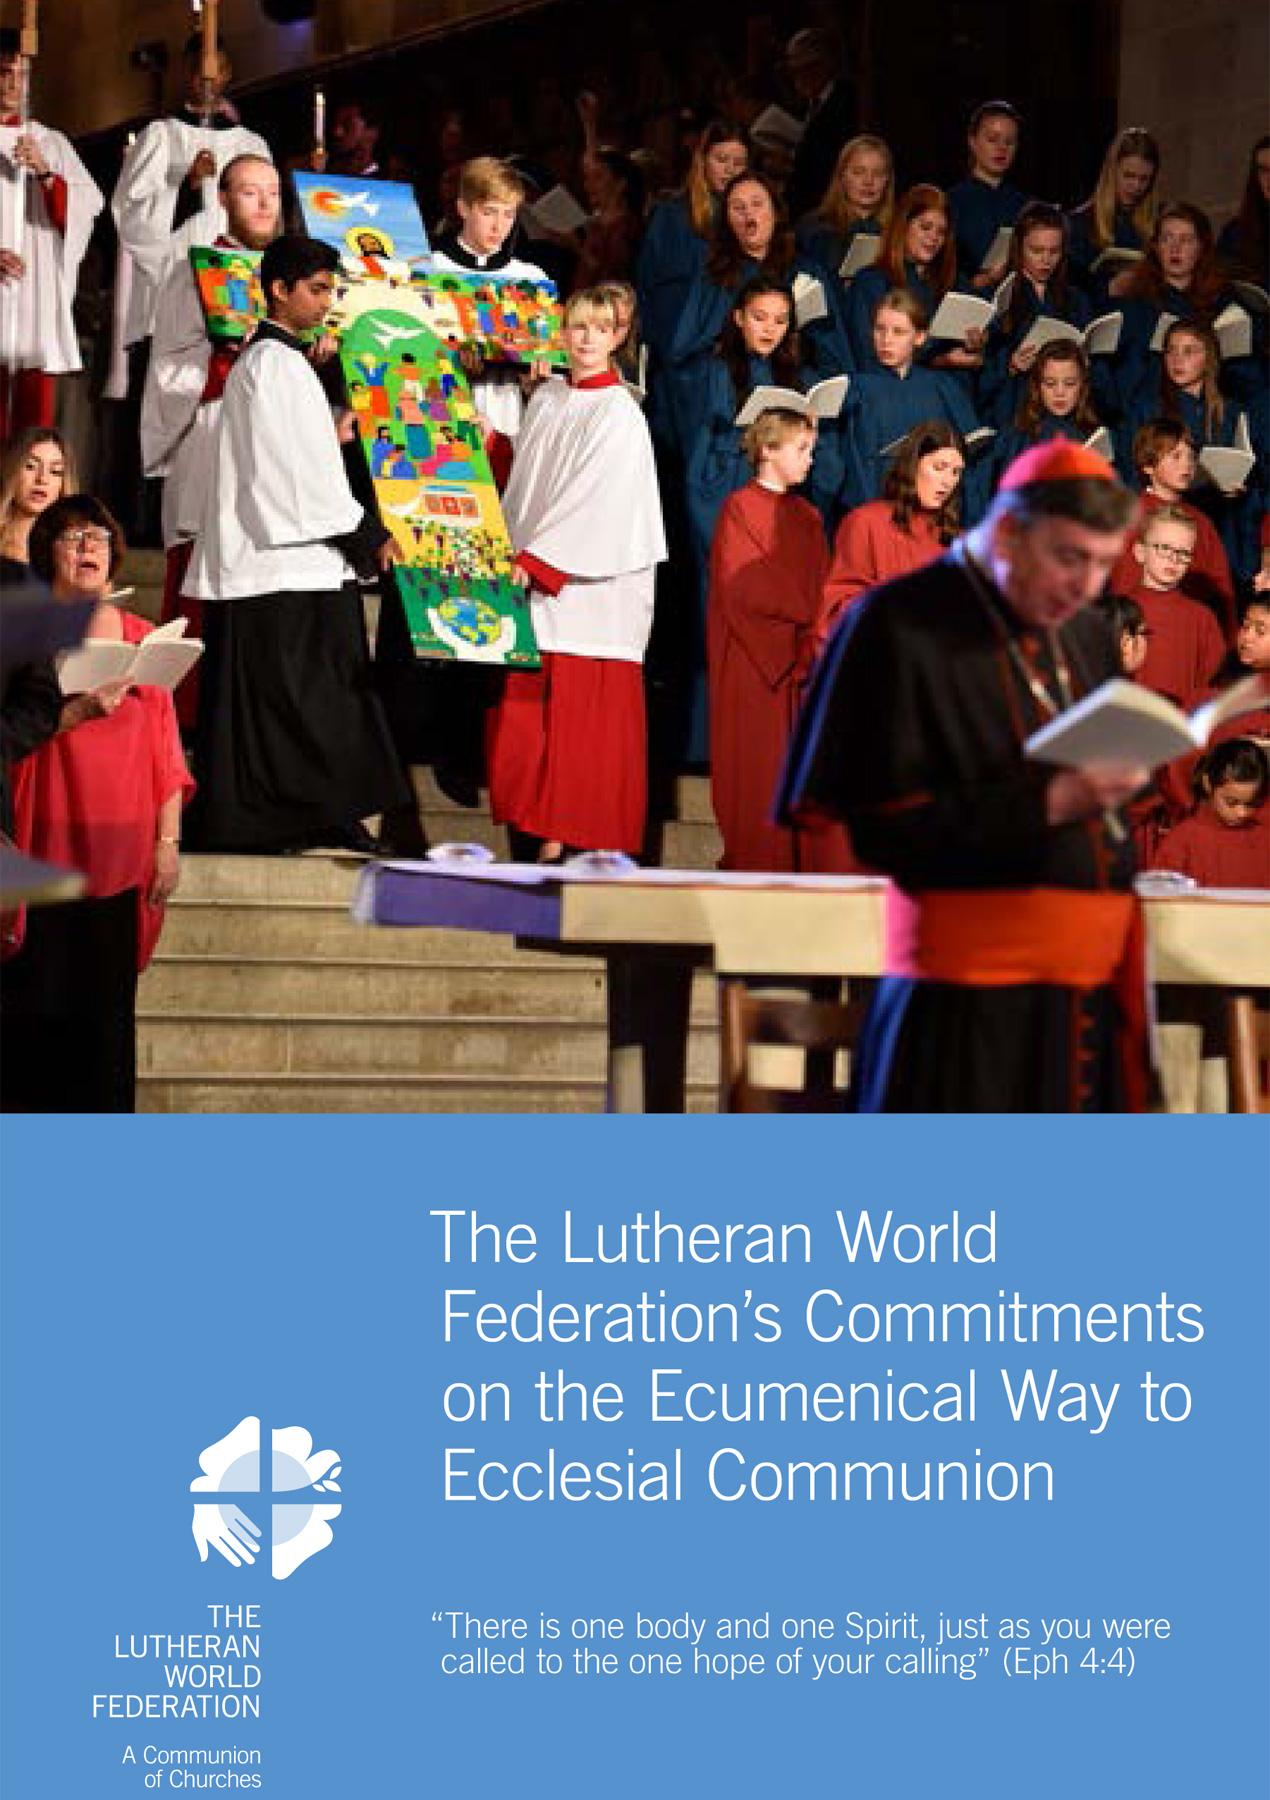 The Lutheran World Federation’s Commitments on the Ecumenical Way to Ecclesial Communion